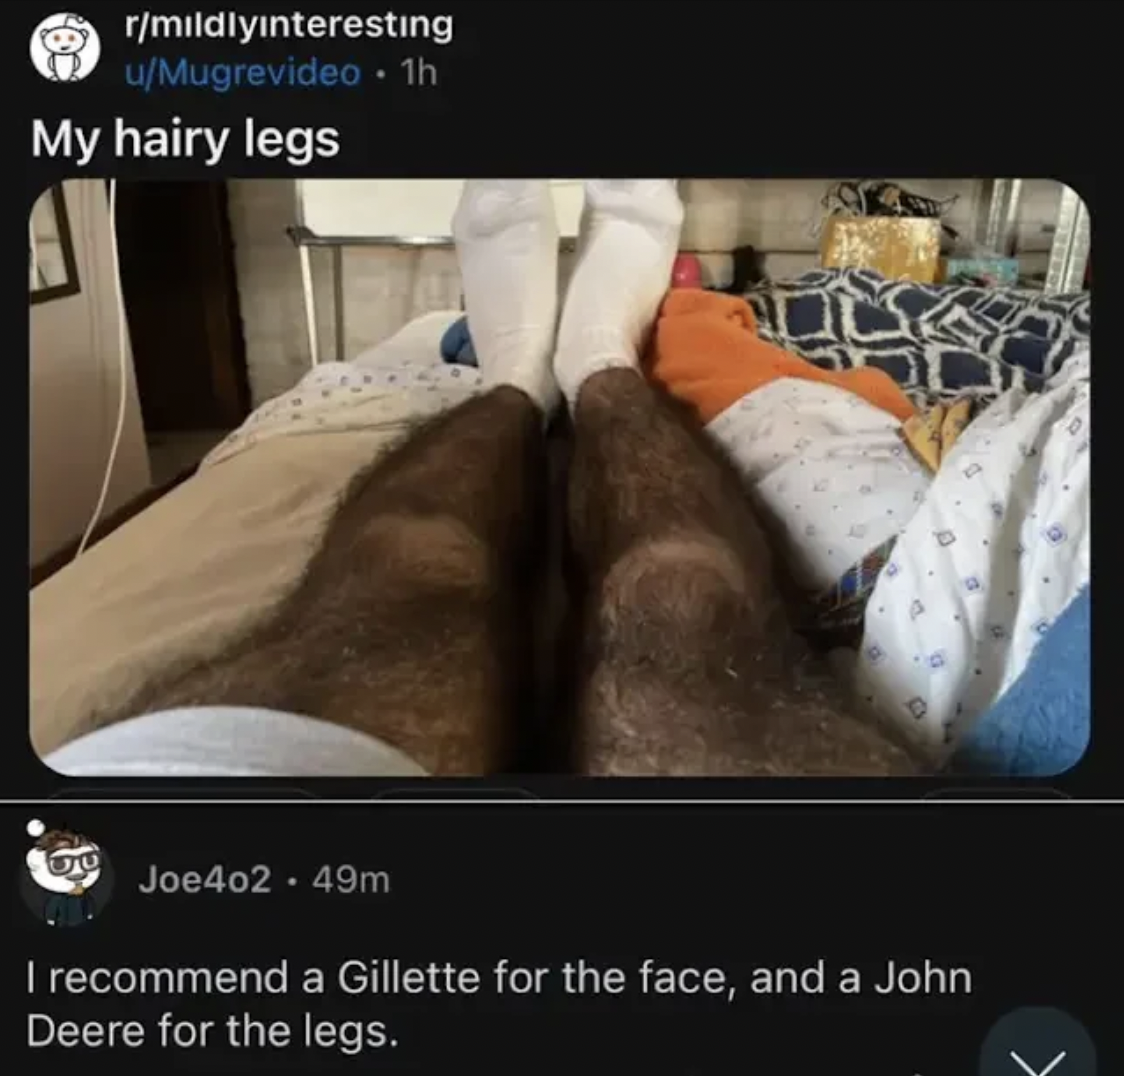 photo caption - rmildlyinteresting uMugrevideo 1h My hairy legs Joe402. 49m I recommend a Gillette for the face, and a John Deere for the legs.